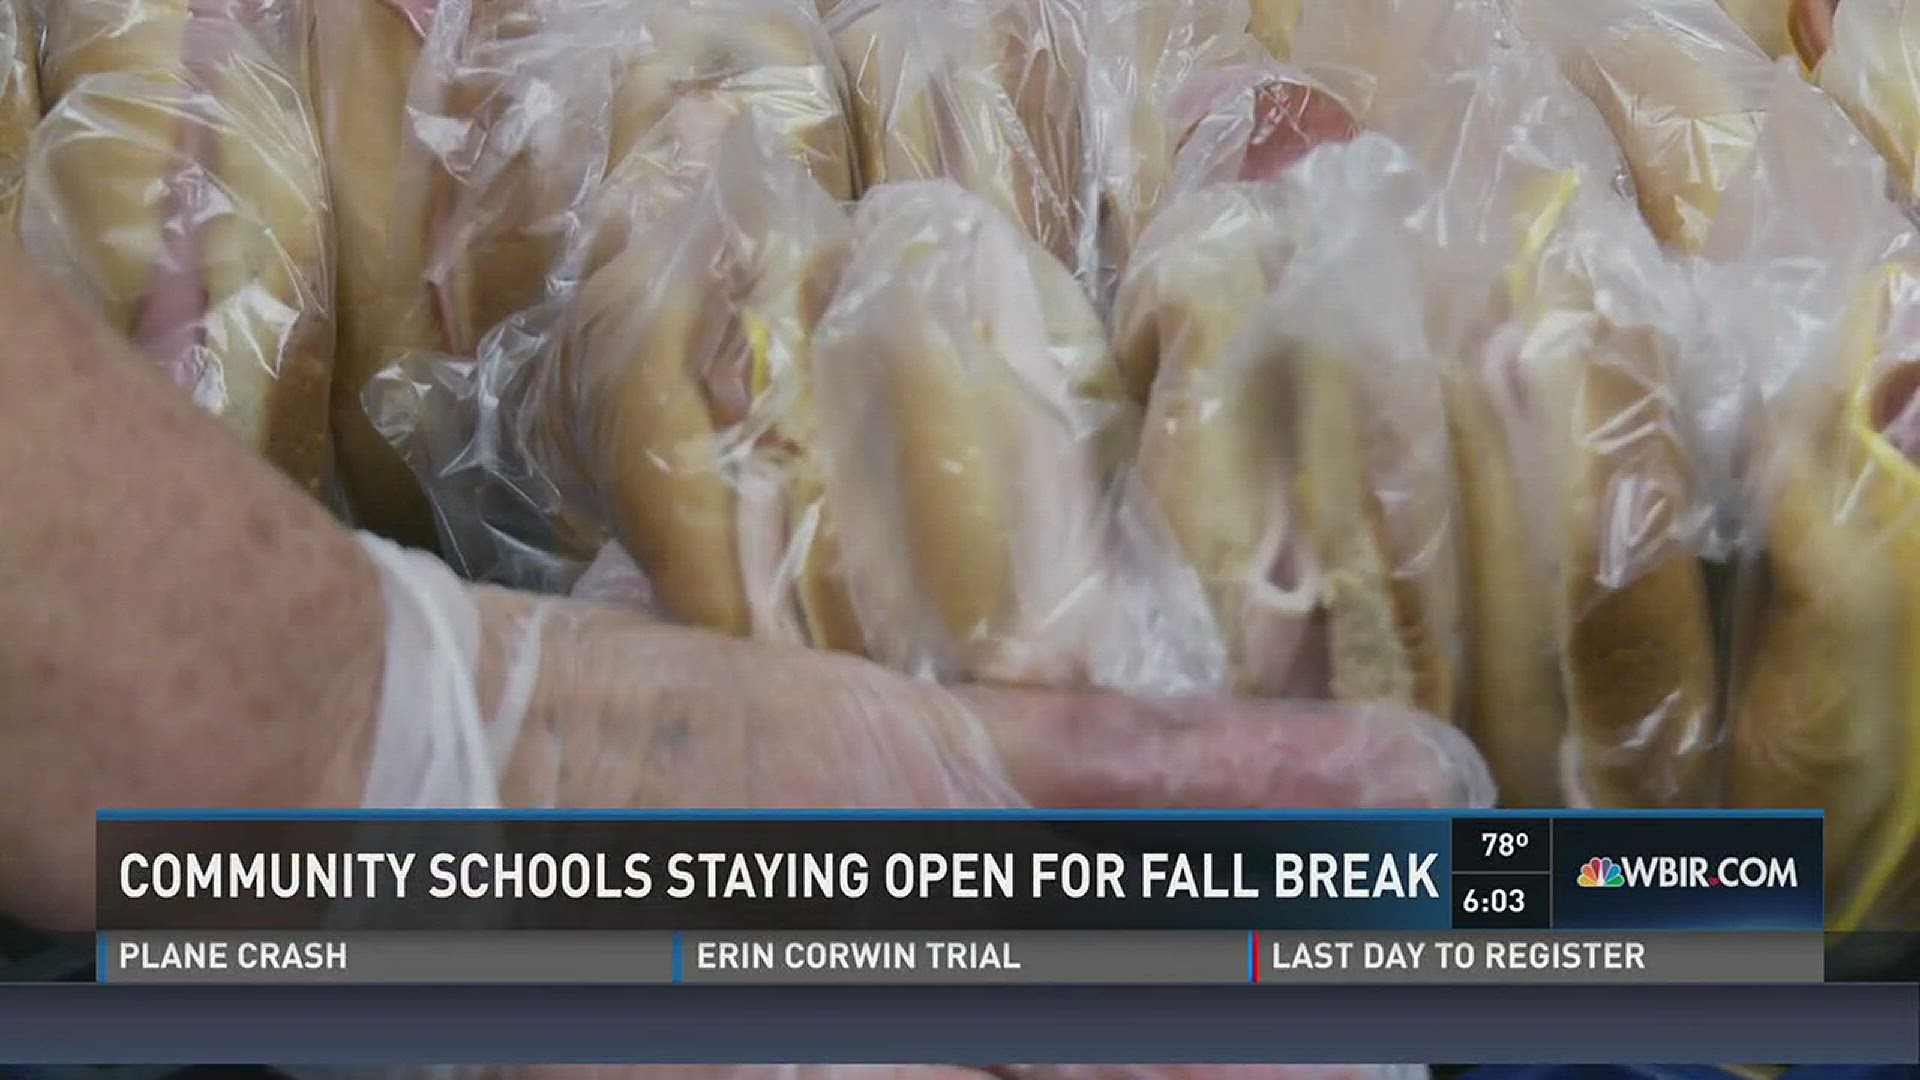 Oct. 11, 2016: It's fall break for thousands of students in East Tennessee, but four Knox County community schools are staying open to give students access to meals and a safe place to stay during the break.